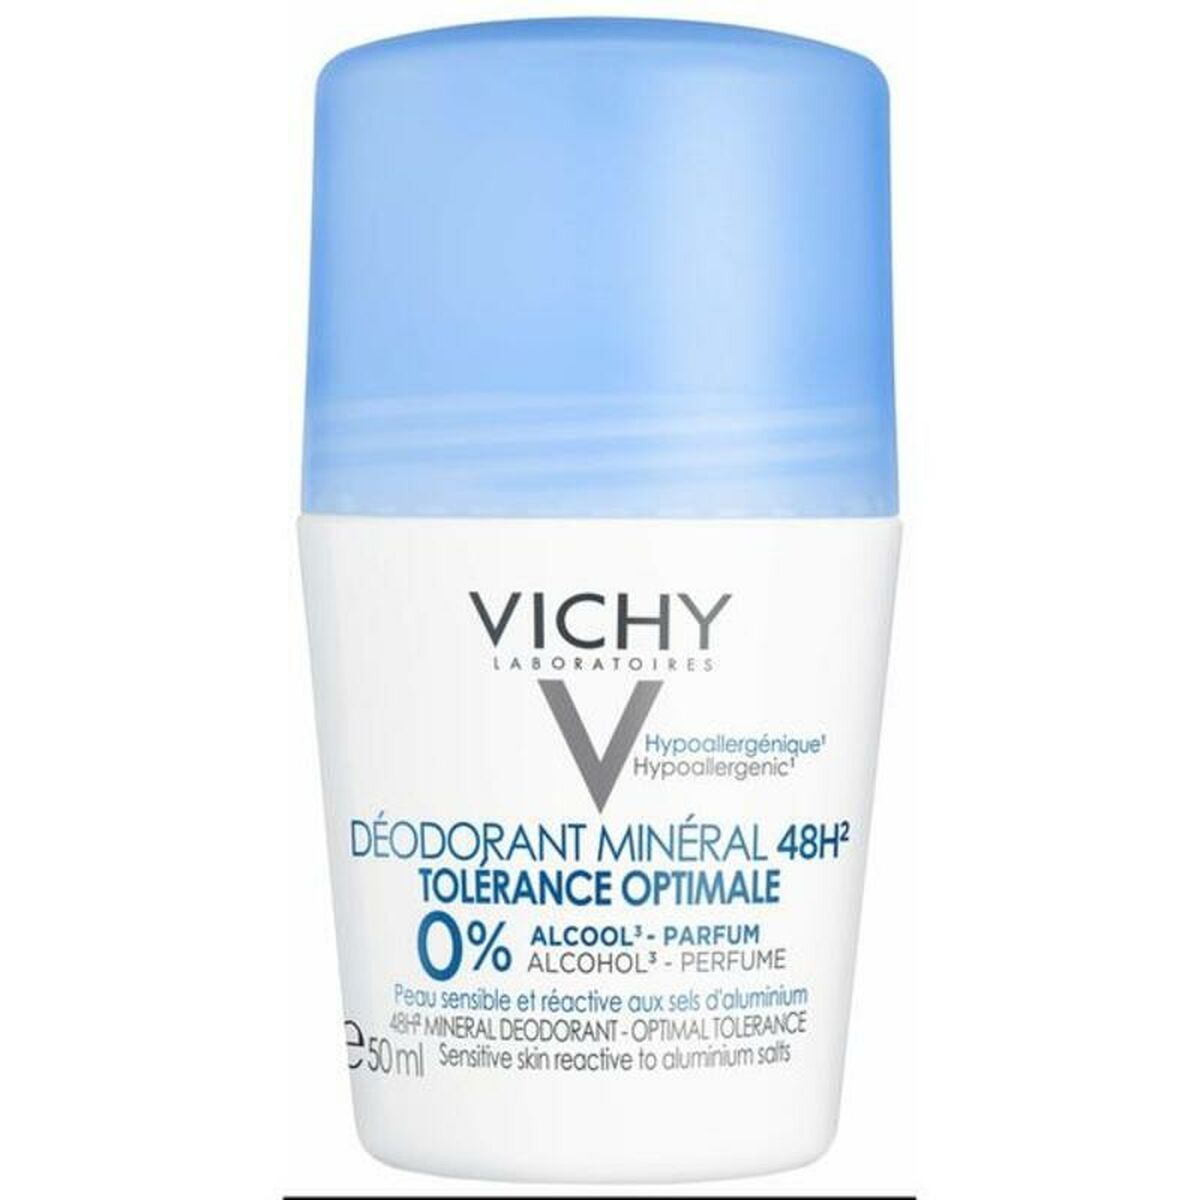 Shampooing vichy tolérance optimale 50 ml